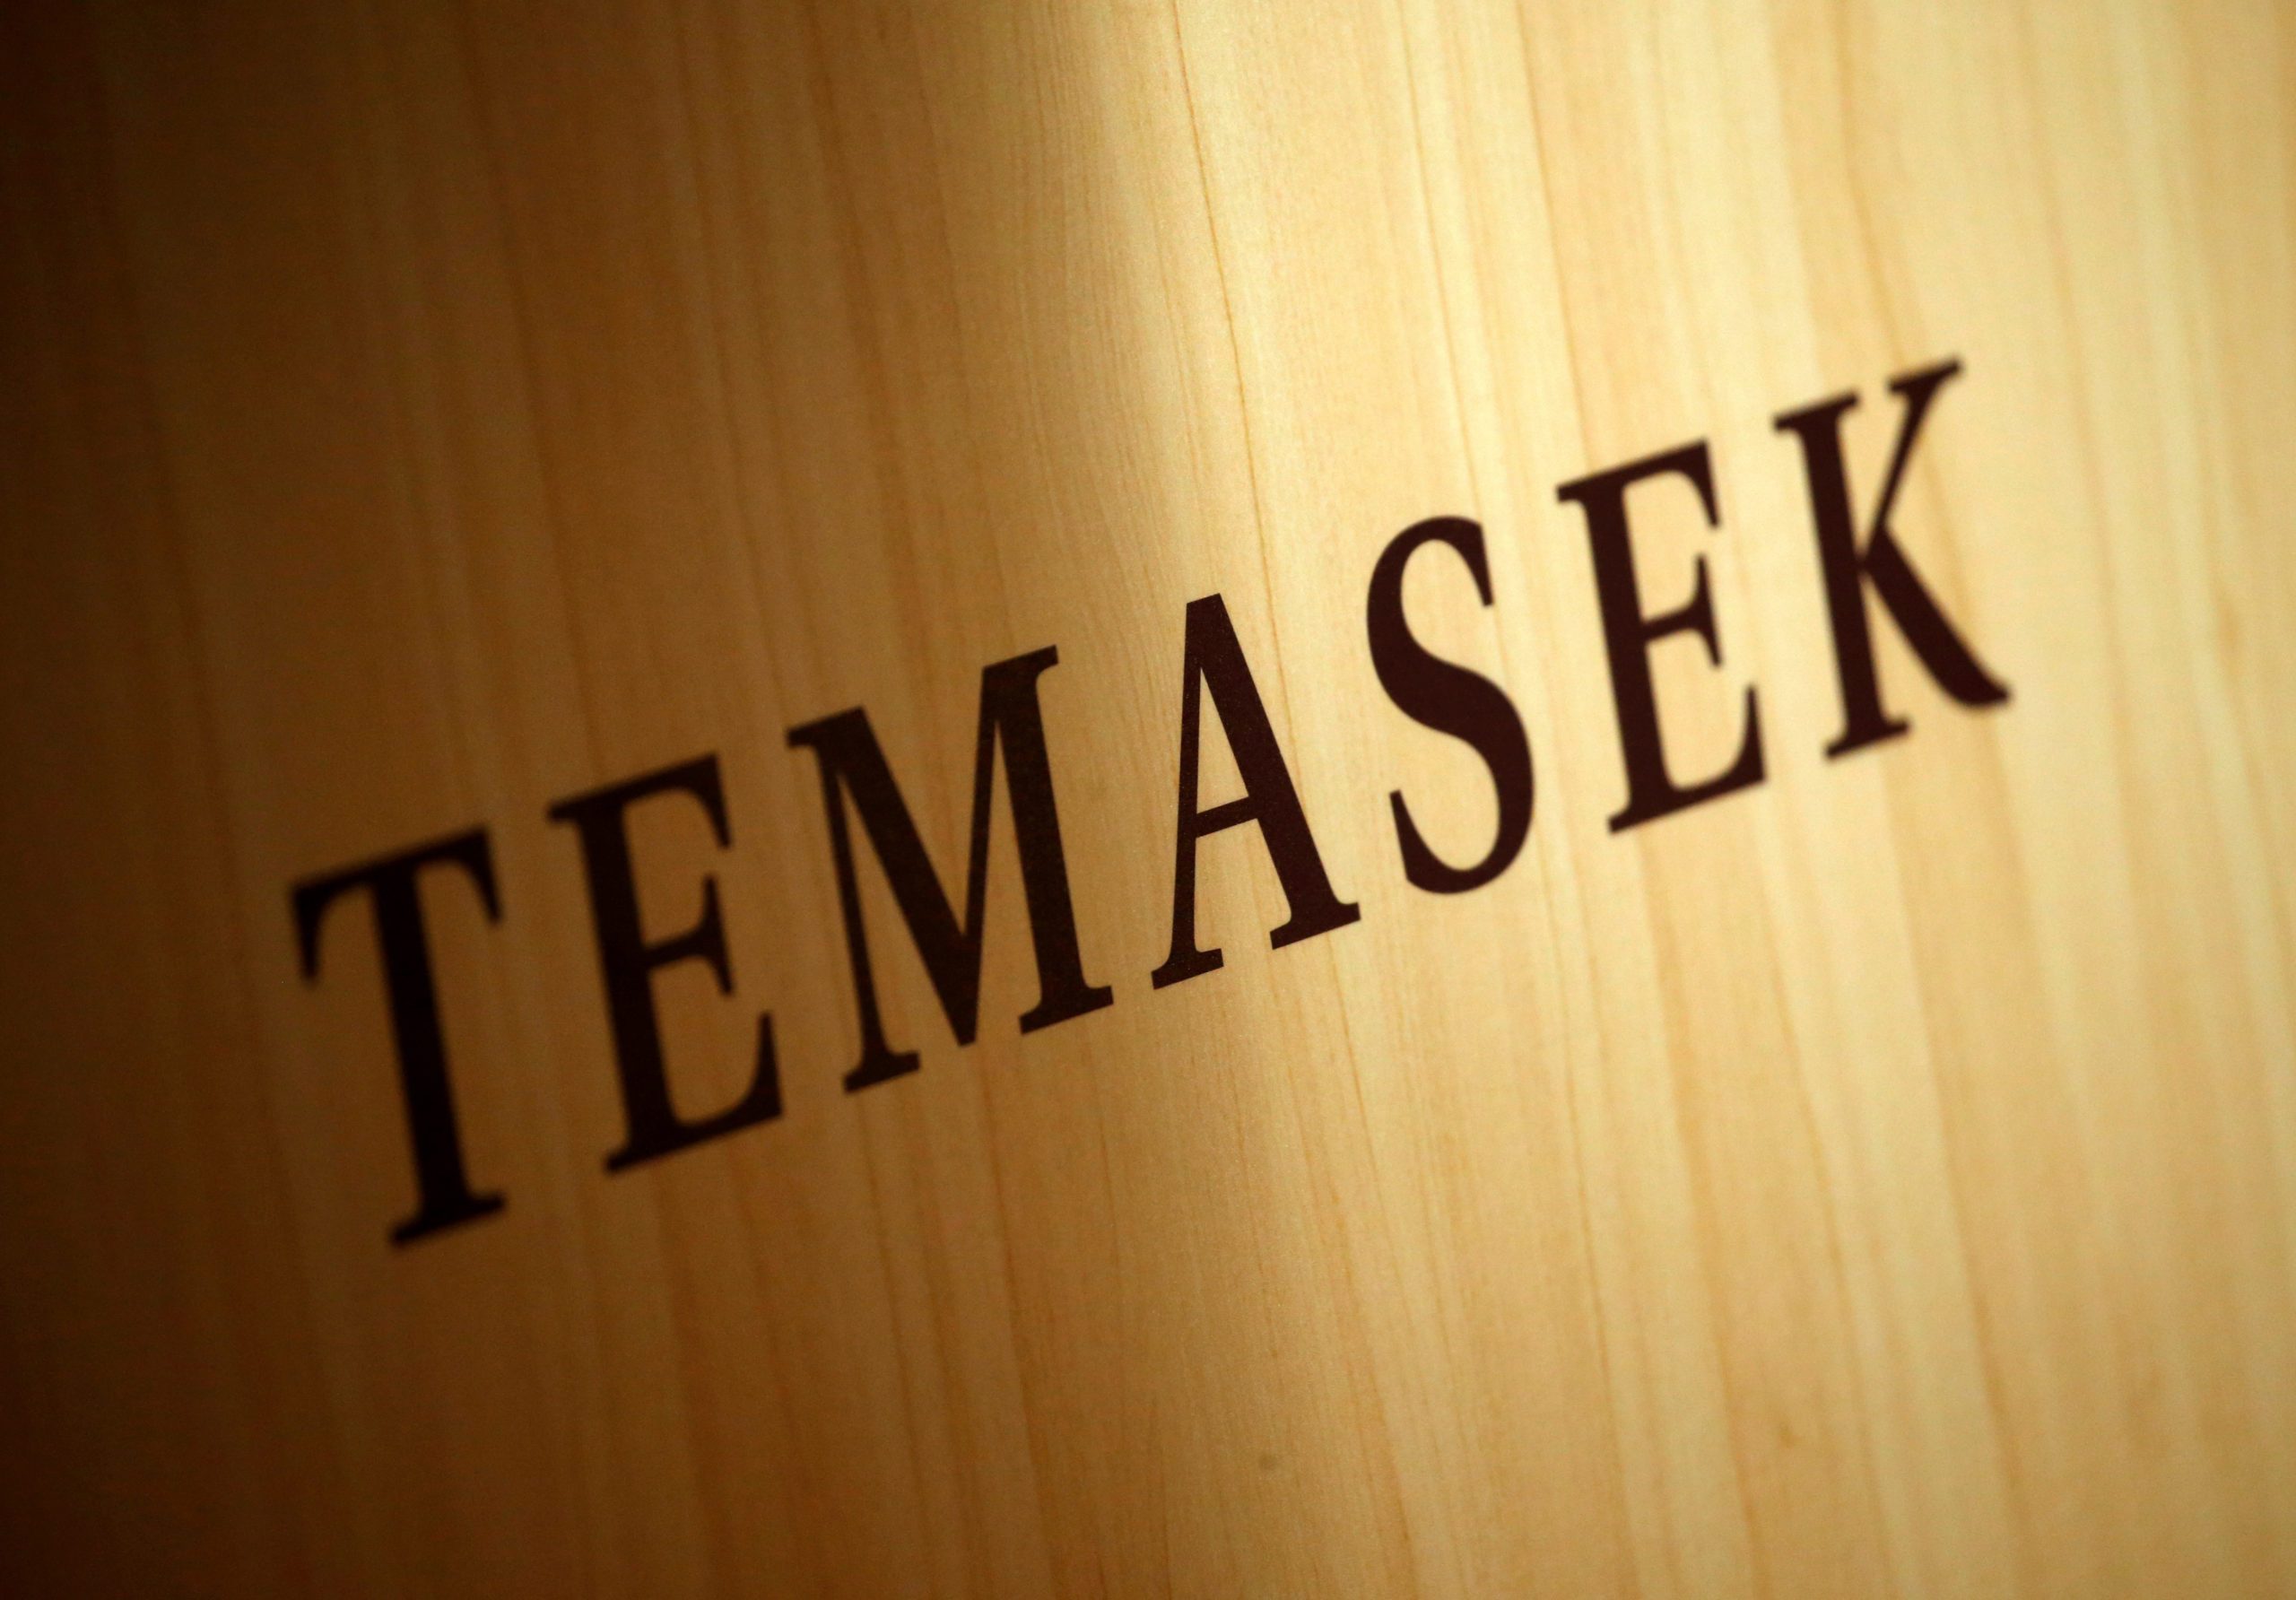 Temasek said to be exploring potential $2b sale of Pavilion Energy assets